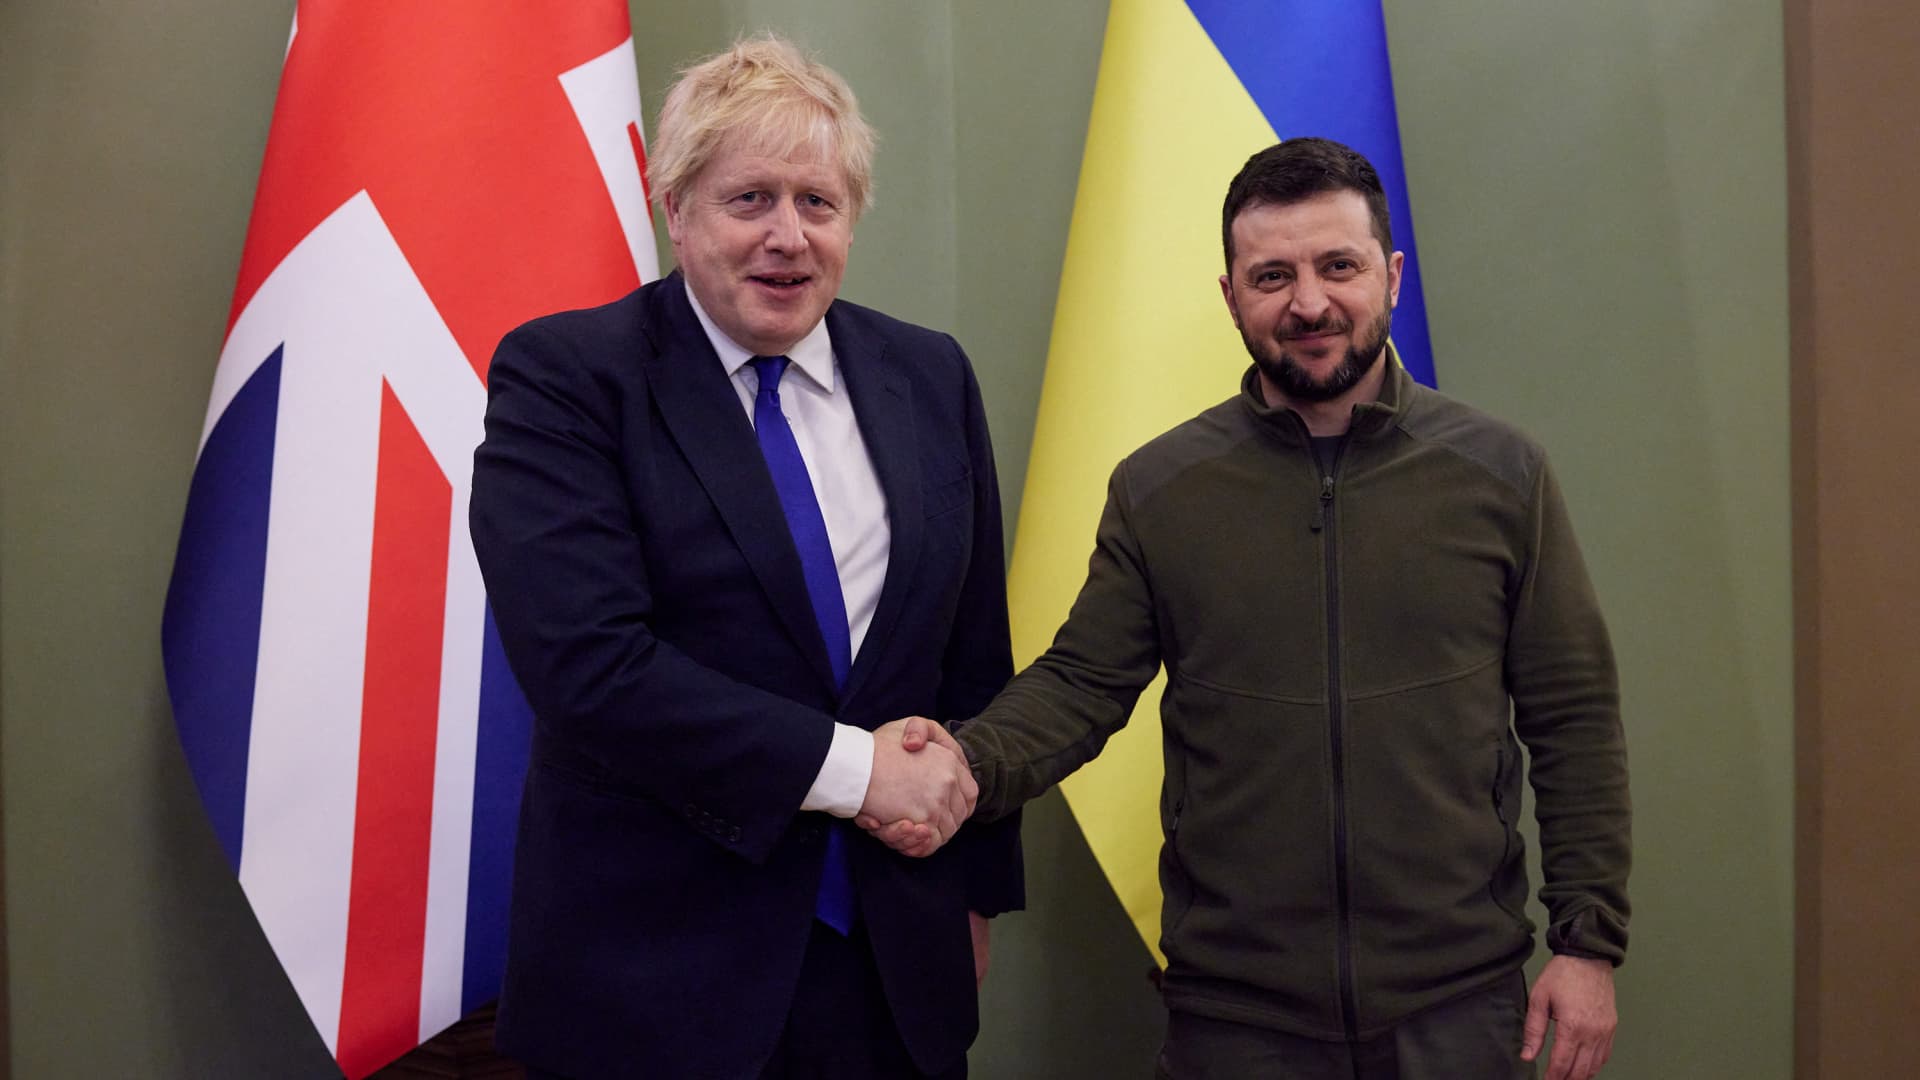 Ukraine's President Volodymyr Zelenskiy and British Prime Minister Boris Johnson shake hands before a meeting, as Russia's attack on Ukraine continues, in Kyiv, Ukraine April 9, 2022. 